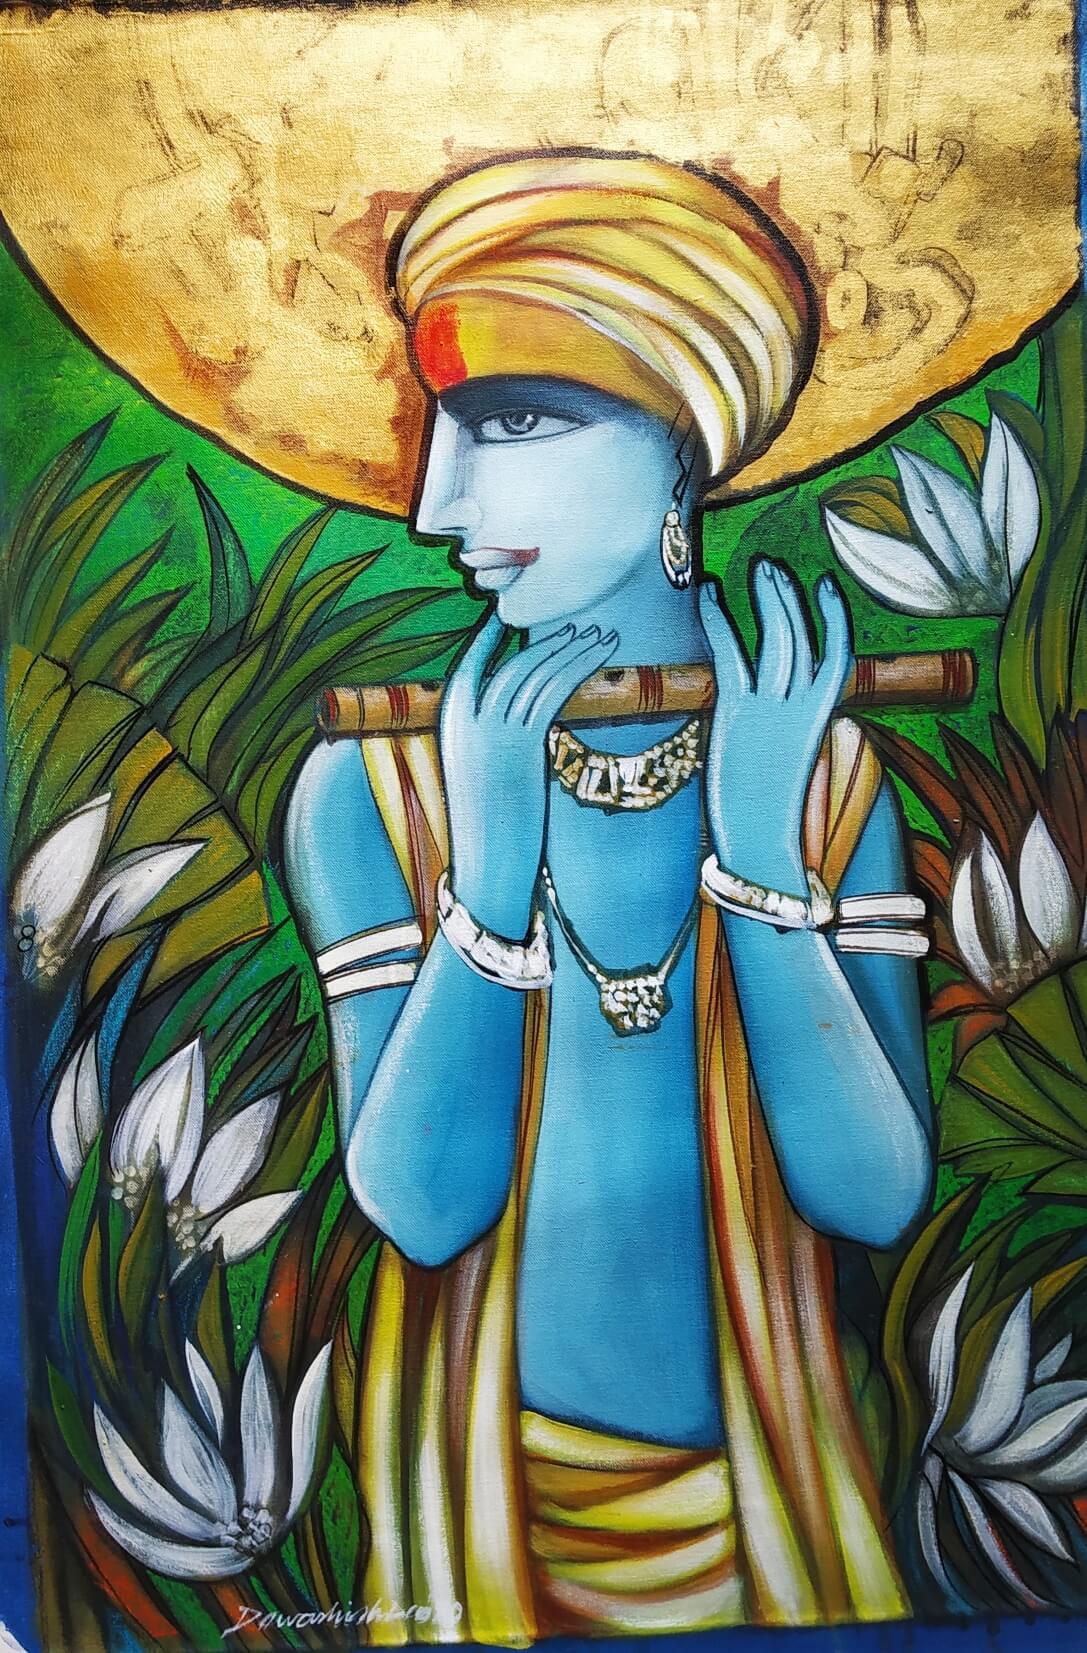 Dewashish Das Figurative Painting - Krishna, Acrylic on Canvas, Blue, Yellow colours by Indian Artist "In Stock"